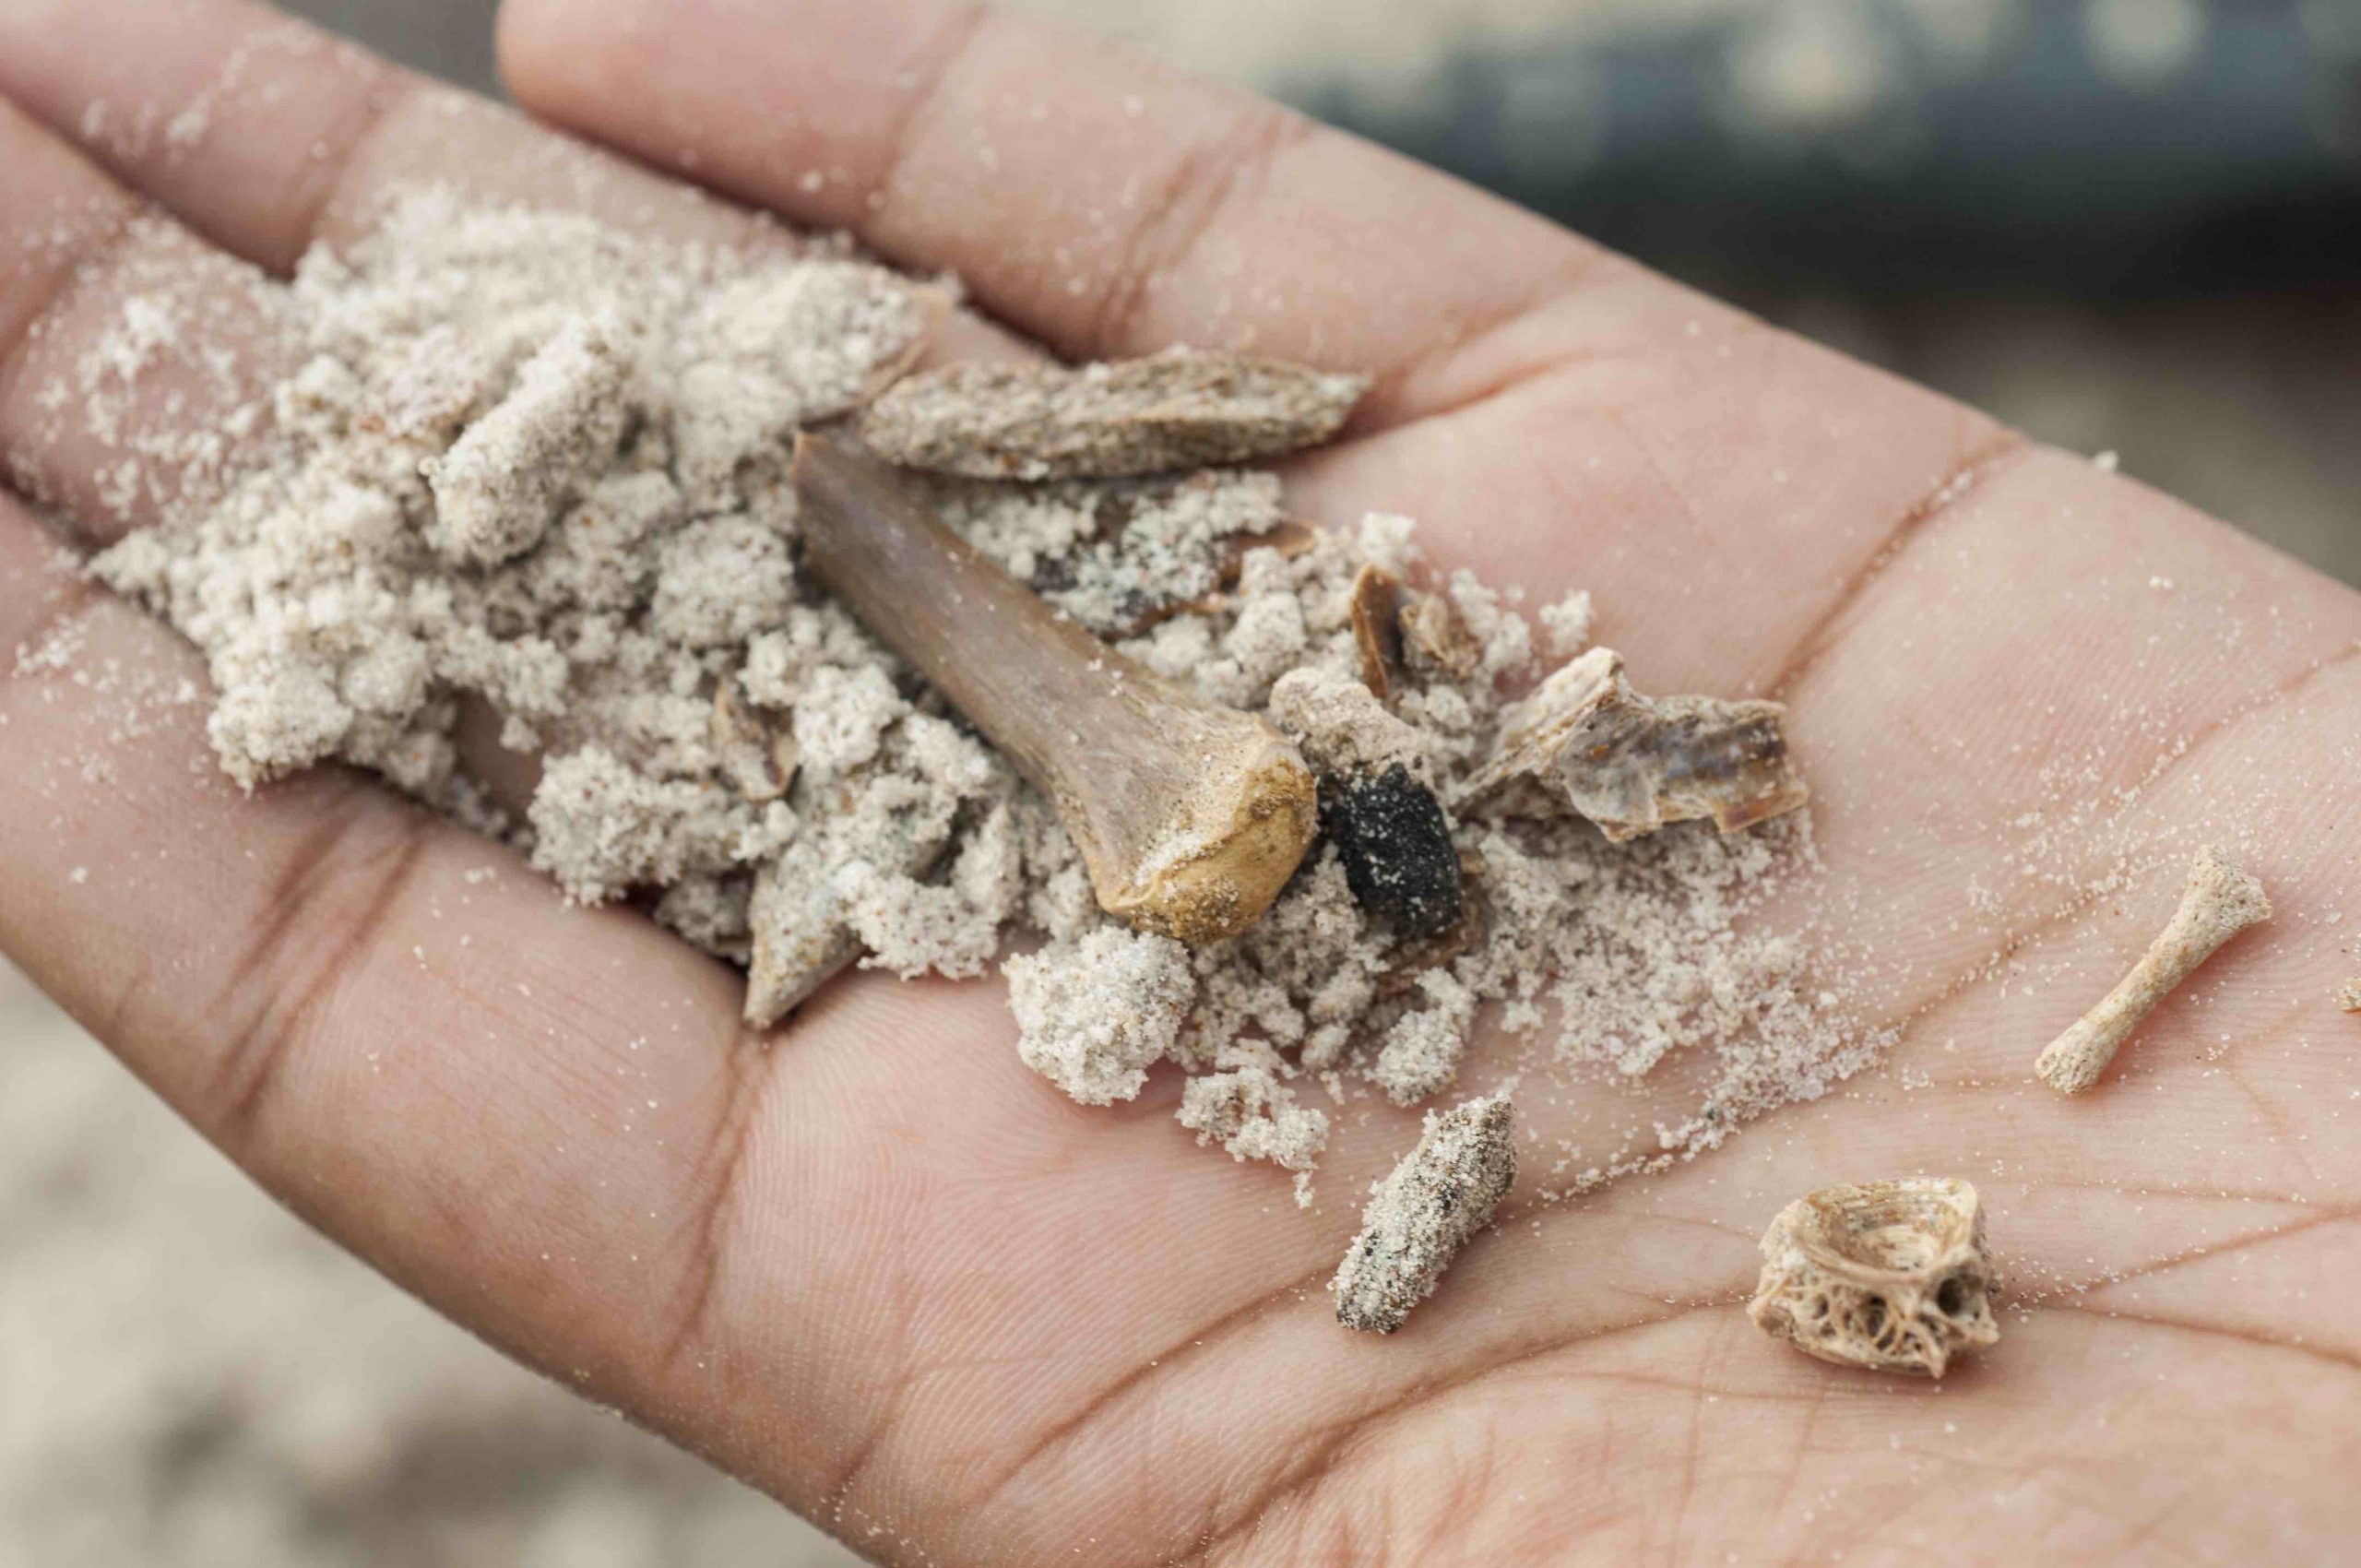 A person holds sand with several bones in it in the palm of their hand.